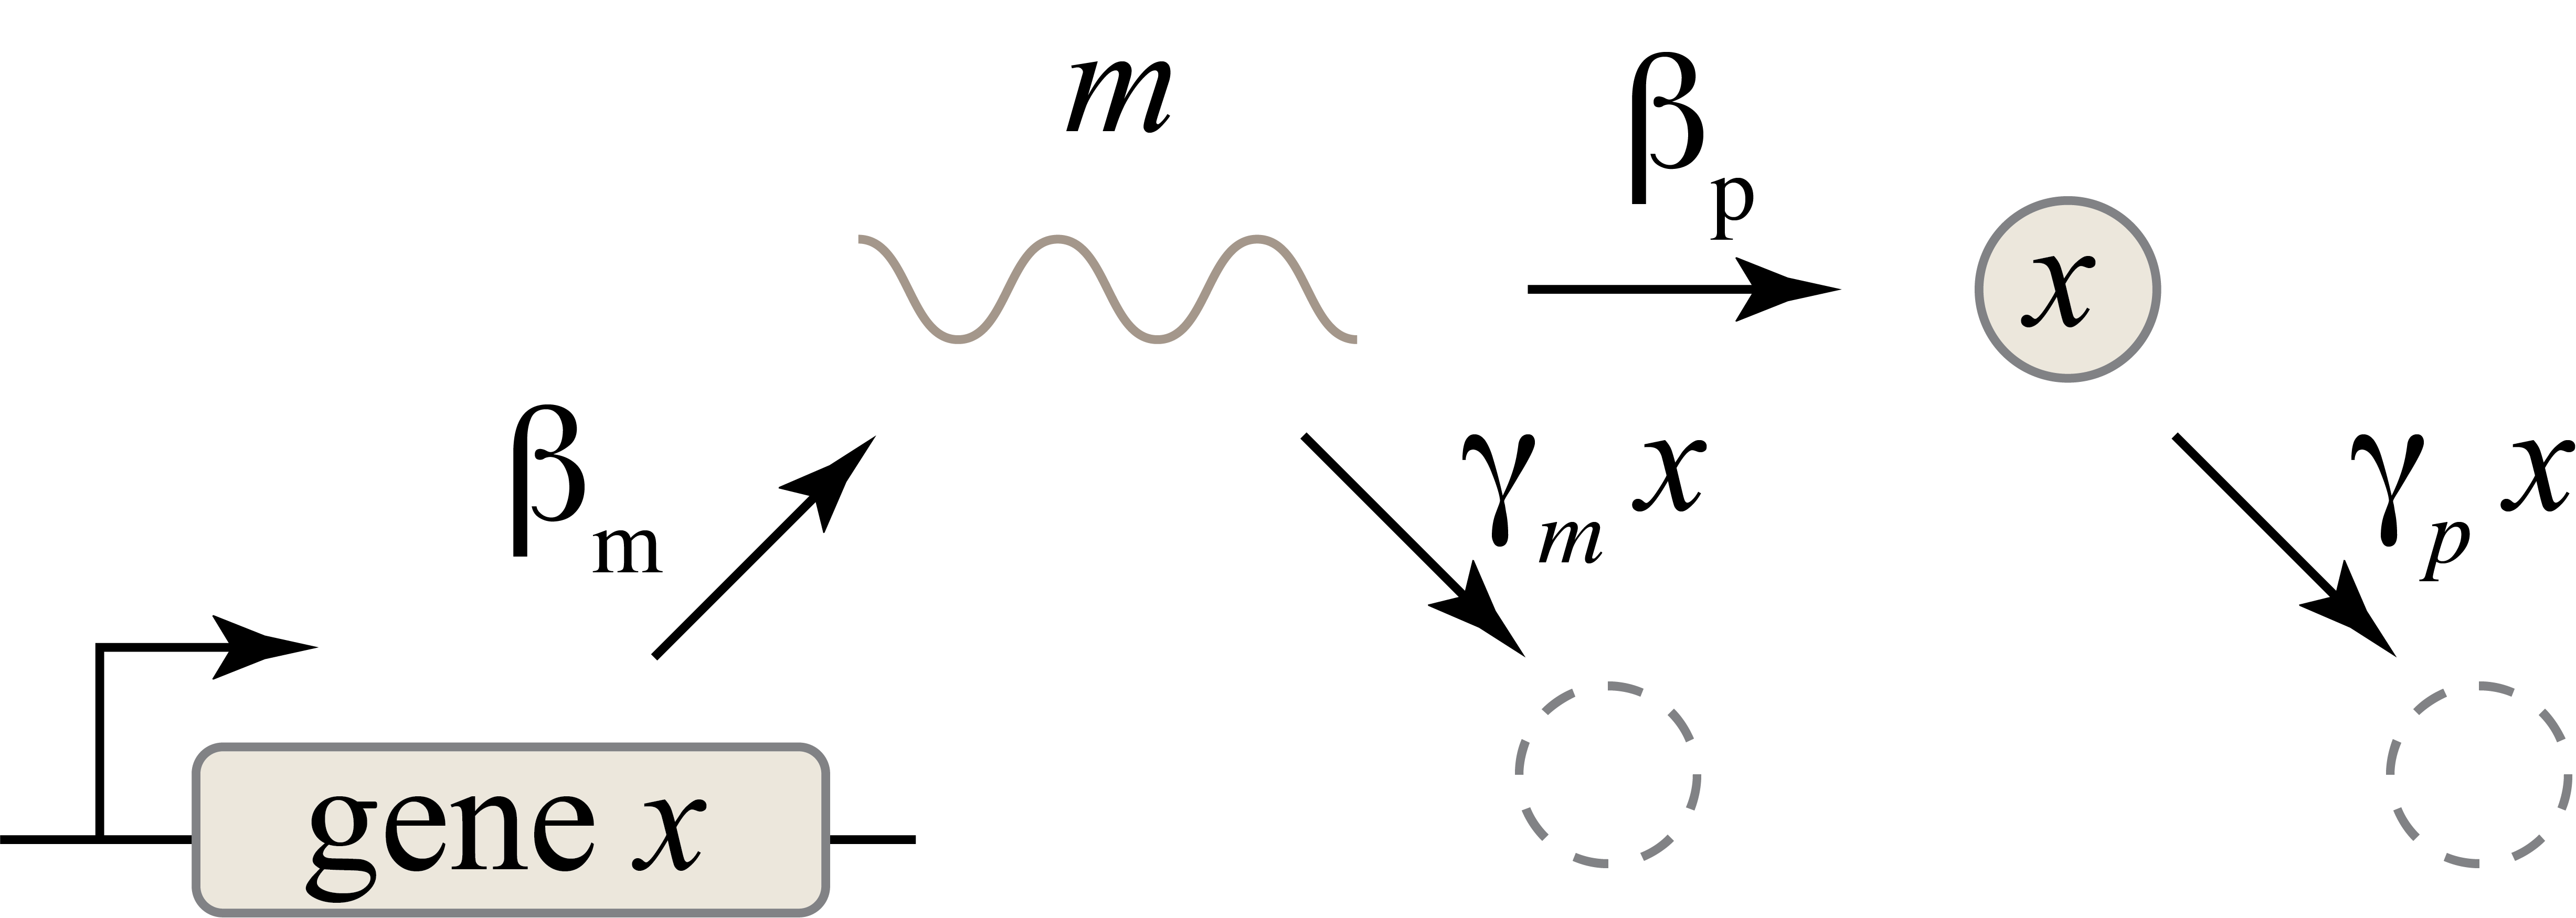 The simplest circuit, now considering both transcription and translation, with mRNA (m) being produced and reduced.